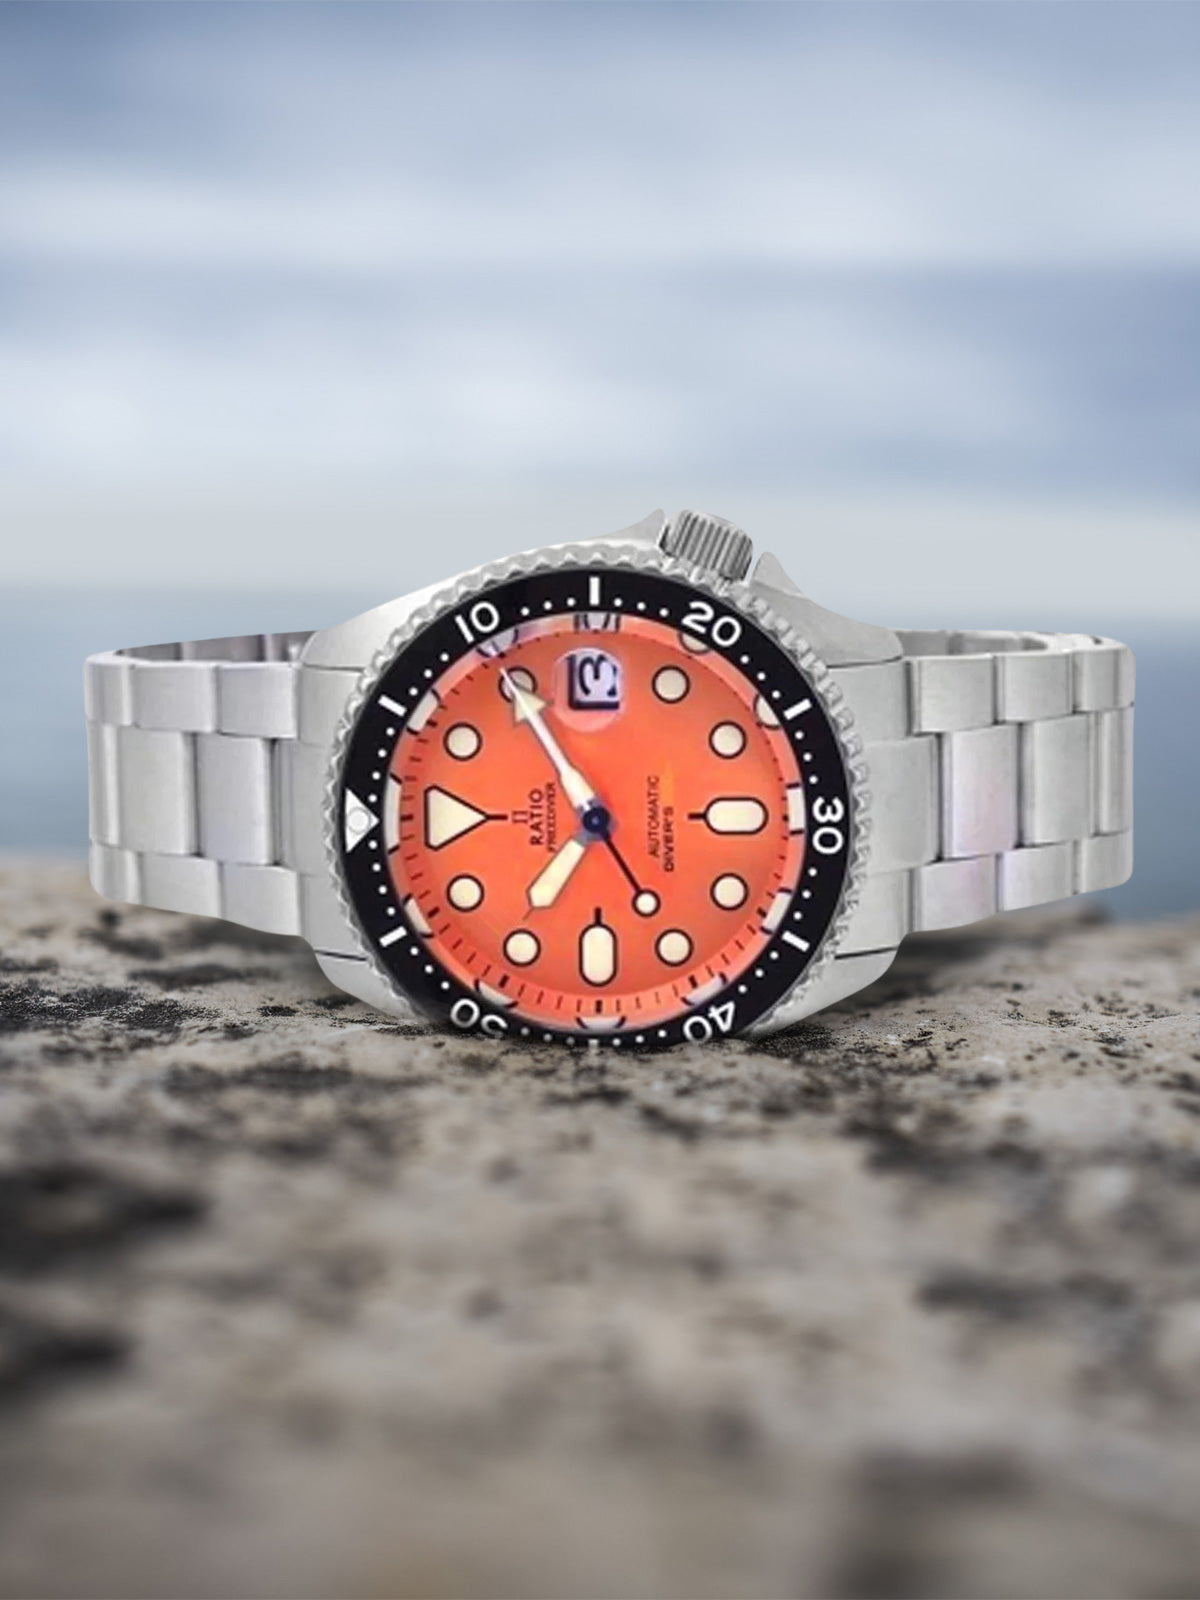 Ratio FreeDiver Orange Dial Sapphire Crystal Stainless Steel Automatic RTB214 200M Mens Watch